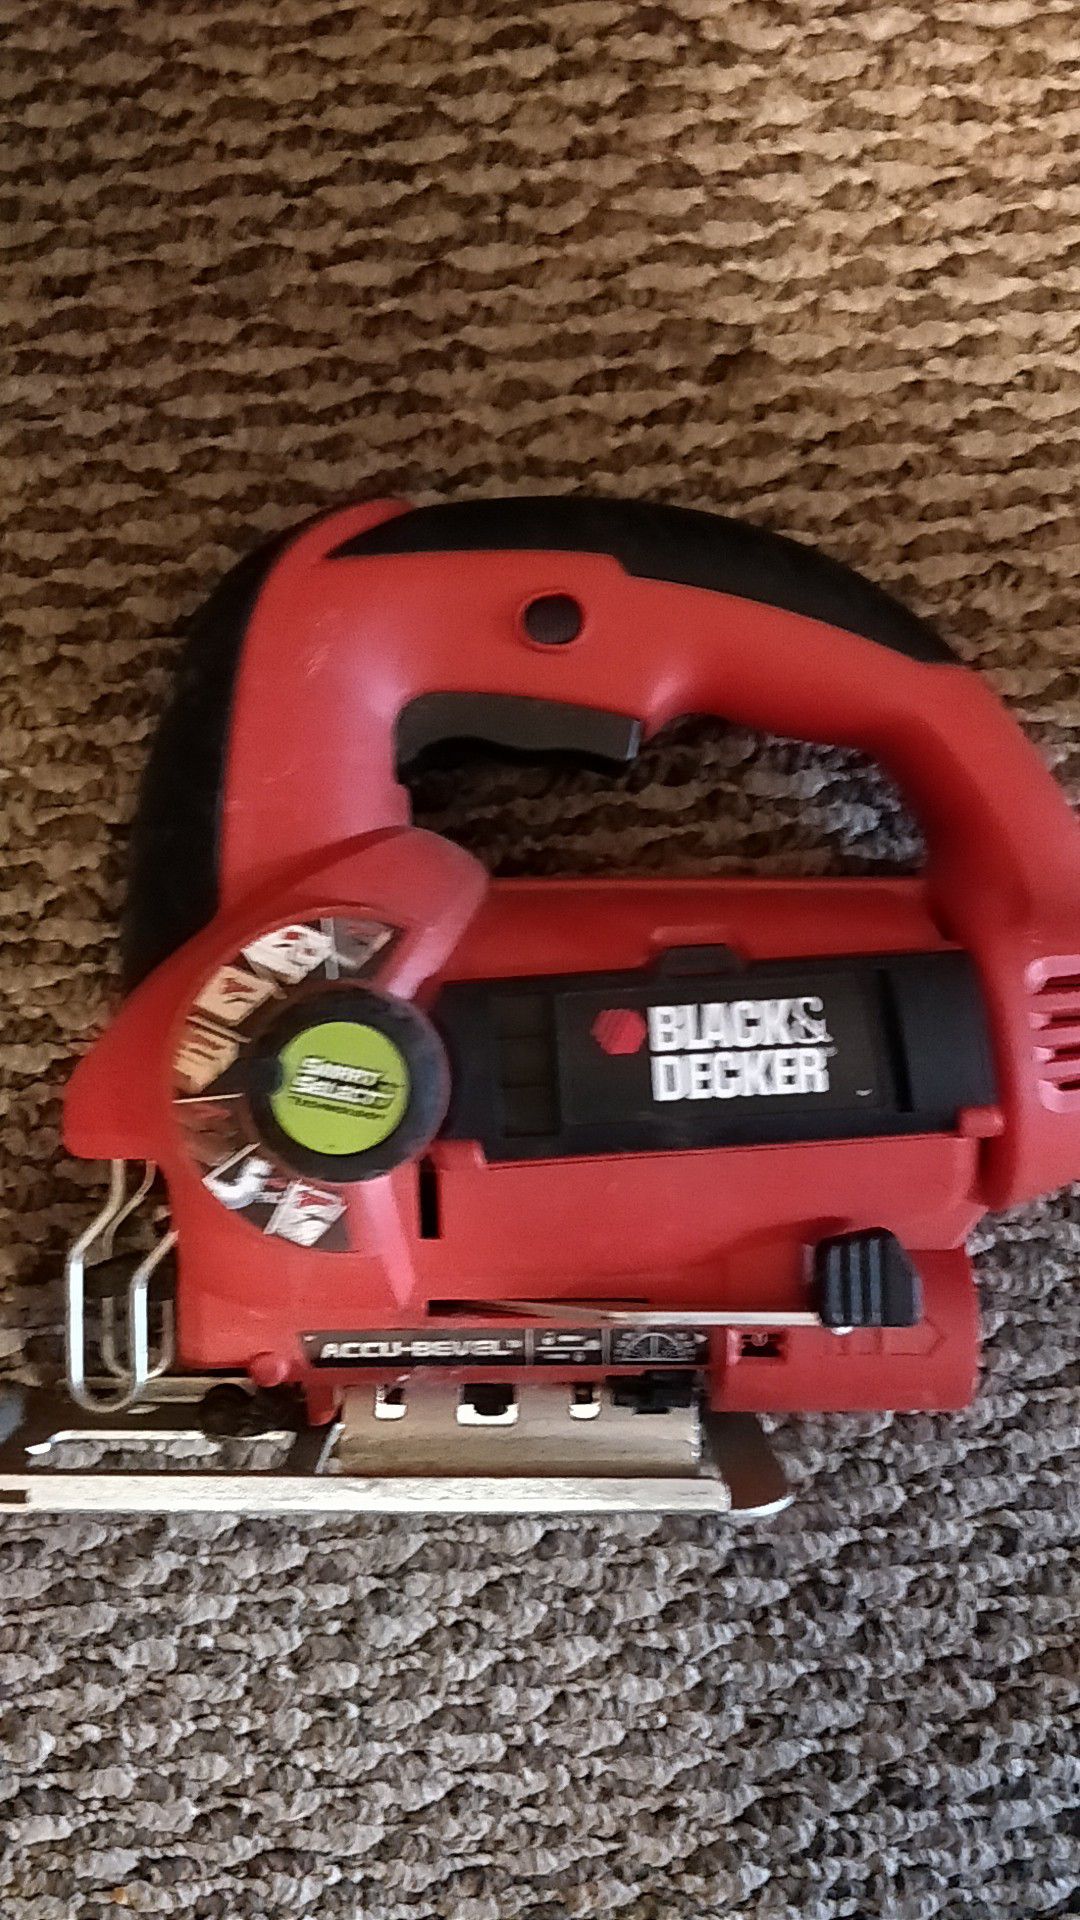 Black & Decker portable jig saw item is not sold!